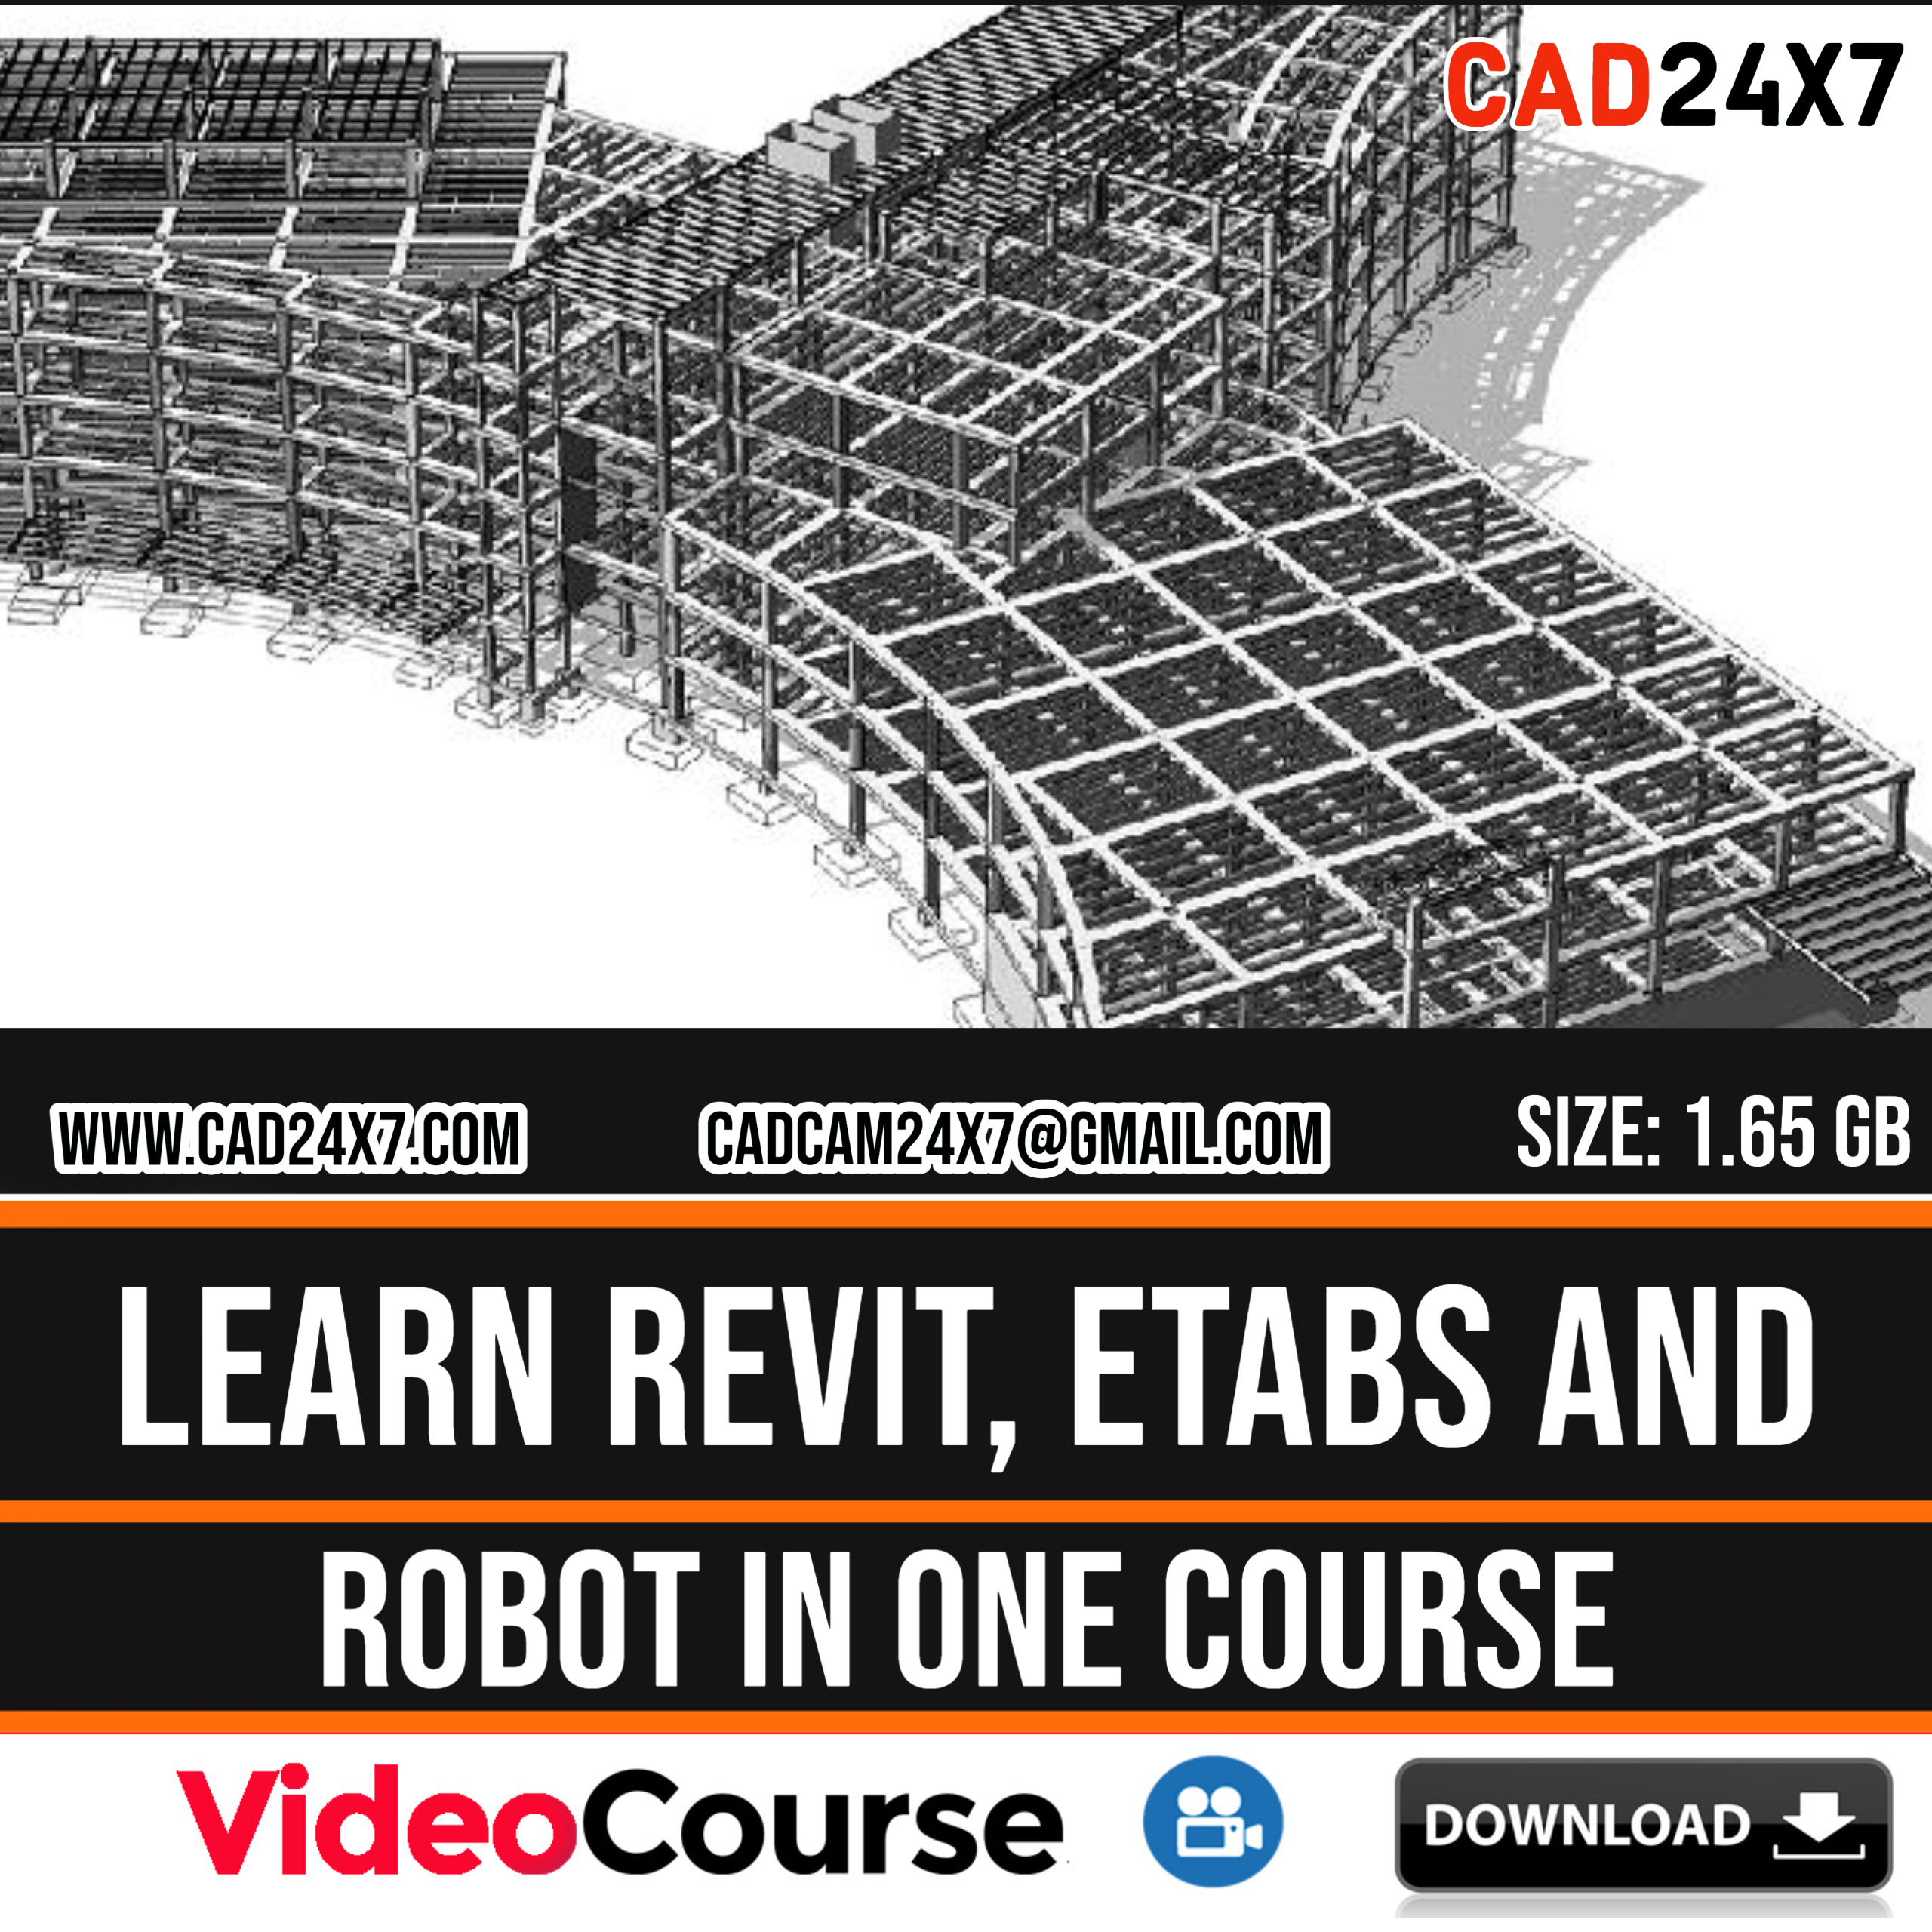 Learn Revit,Etabs and Robot in one course